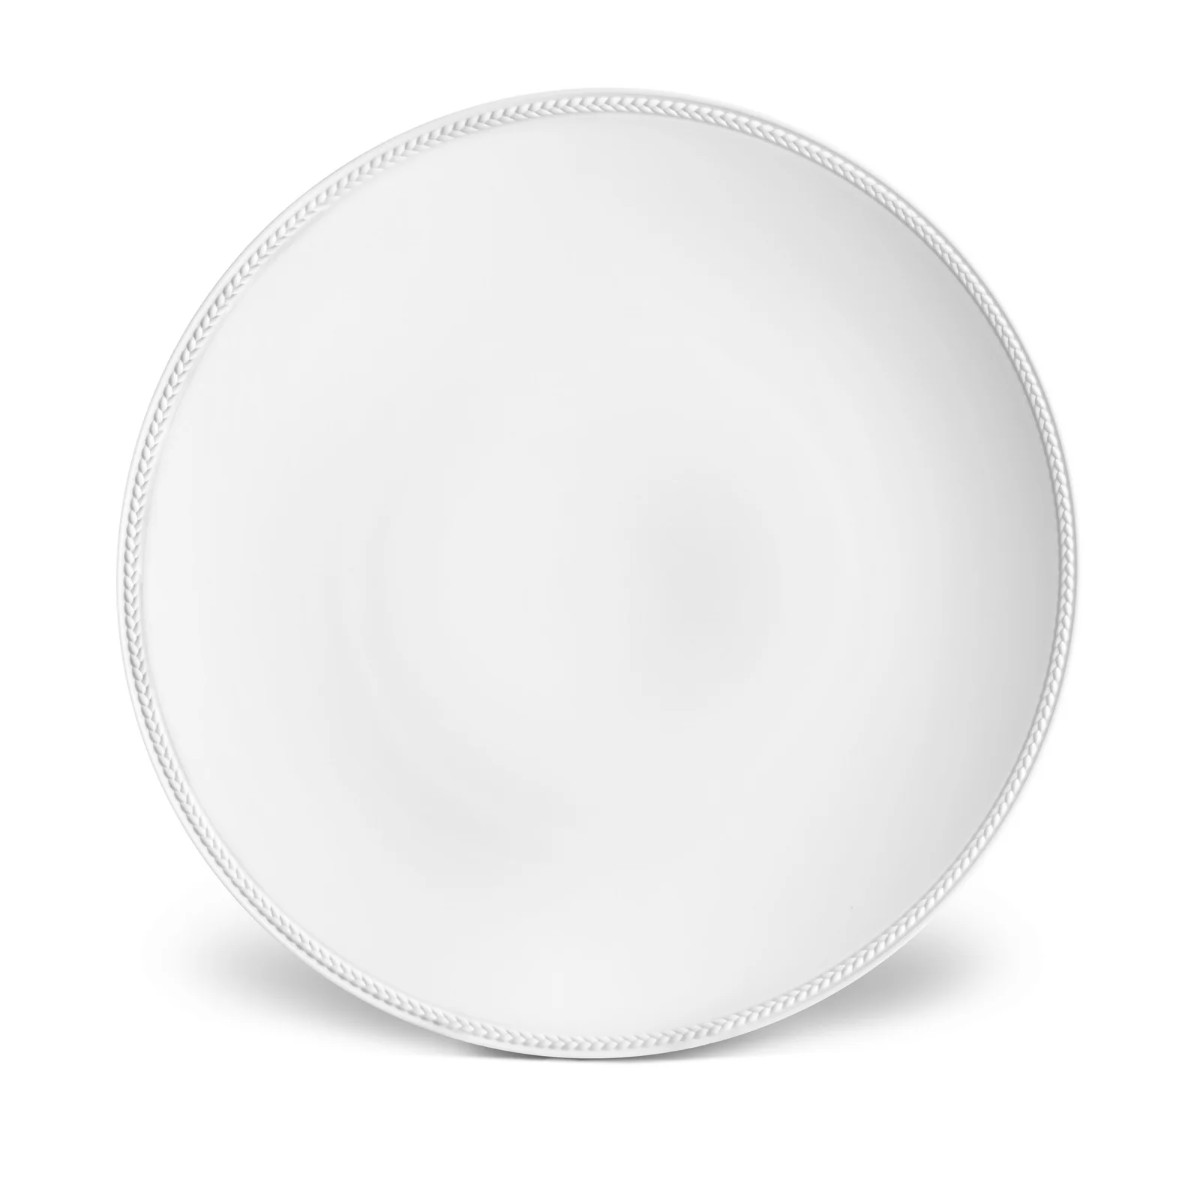 L’Objet | Soie Tressee Charger | White